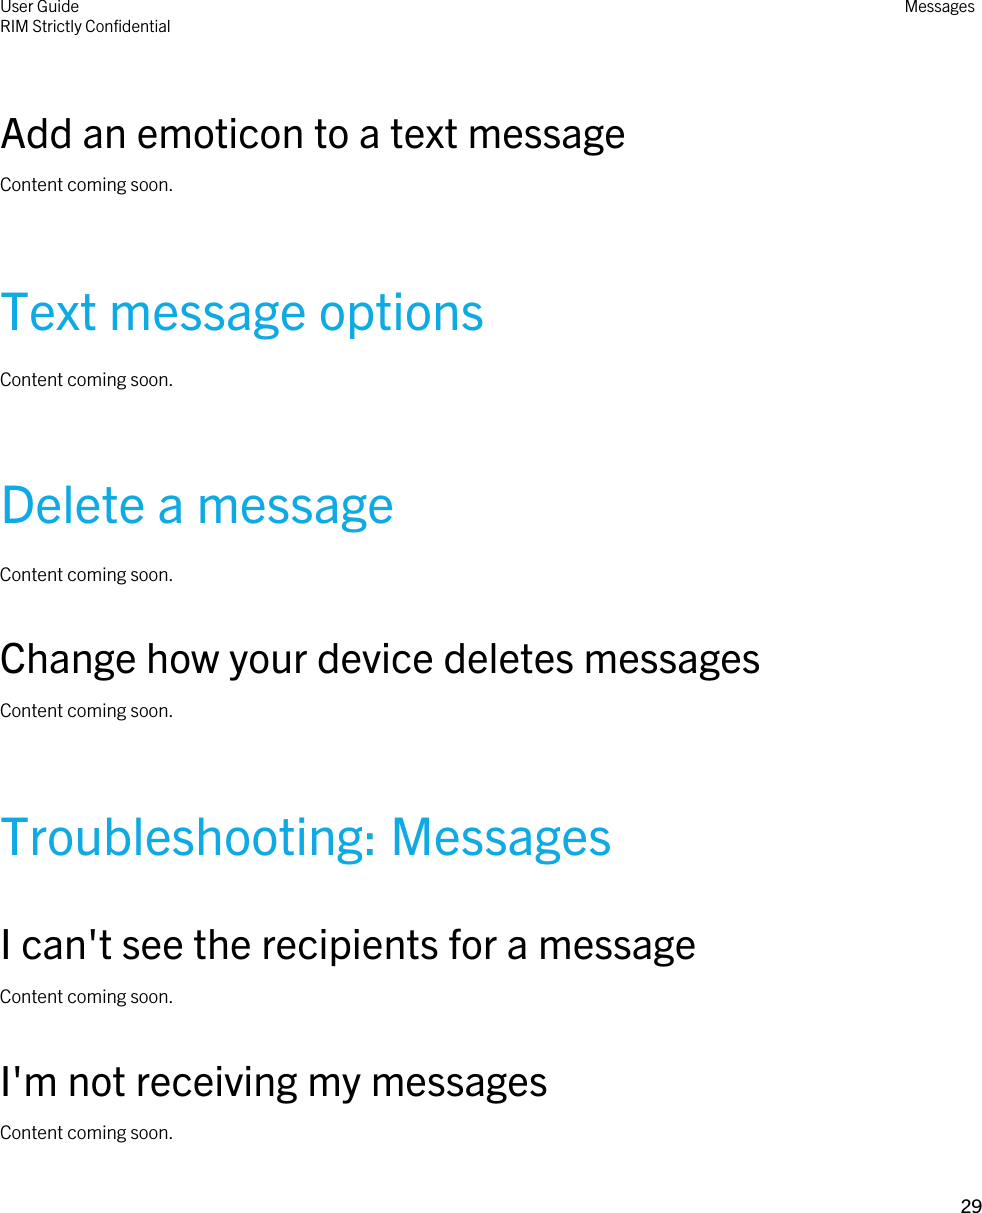 Add an emoticon to a text messageContent coming soon.Text message optionsContent coming soon.Delete a messageContent coming soon.Change how your device deletes messagesContent coming soon.Troubleshooting: MessagesI can&apos;t see the recipients for a messageContent coming soon.I&apos;m not receiving my messagesContent coming soon.User GuideRIM Strictly Confidential Messages29 